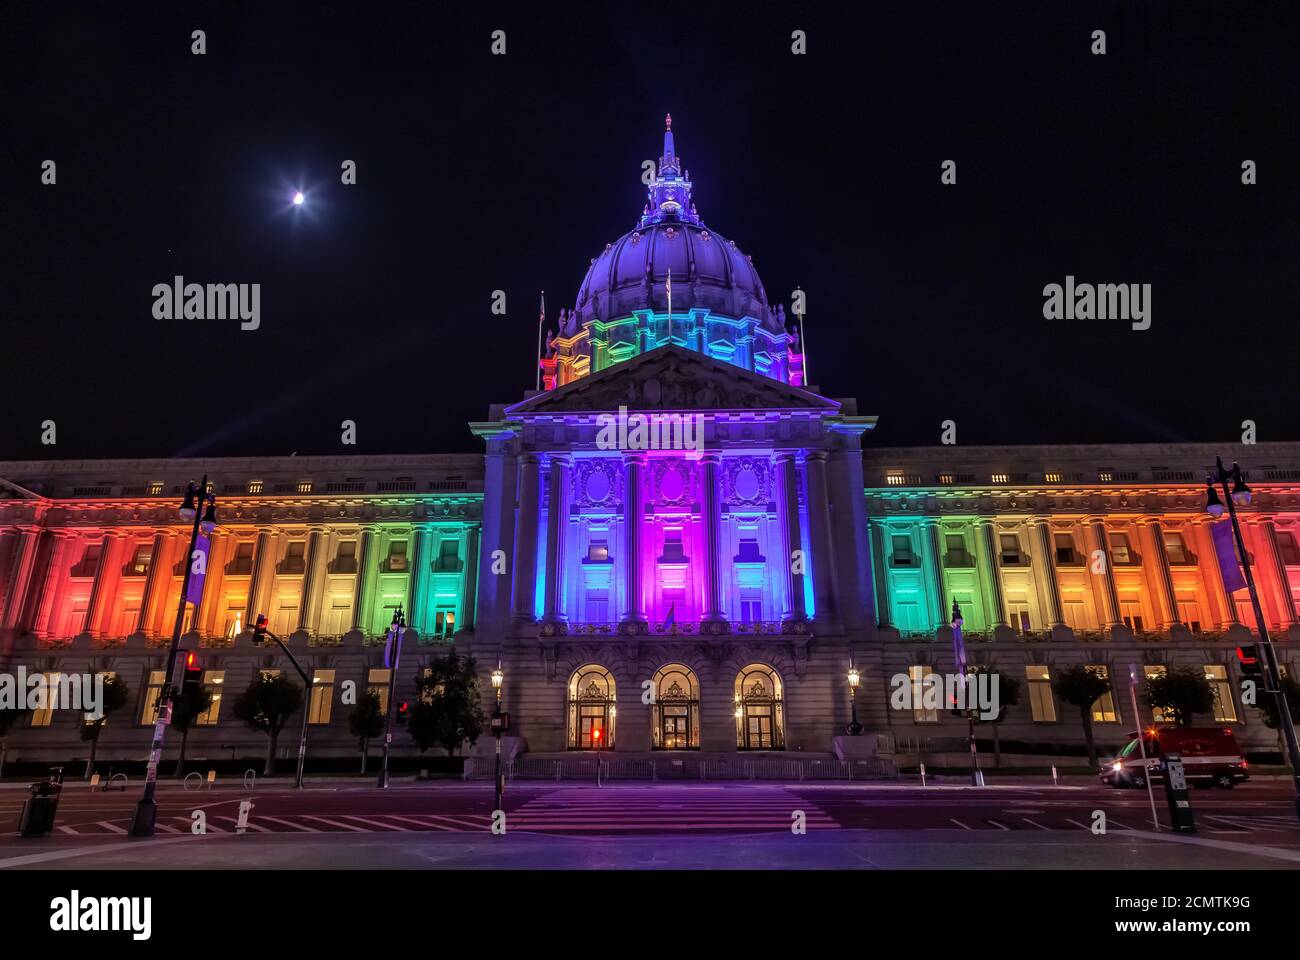 San Francisco City Hall lights up rainbow colors to celebrate the LGBT pride month in June, California, United States. Stock Photo